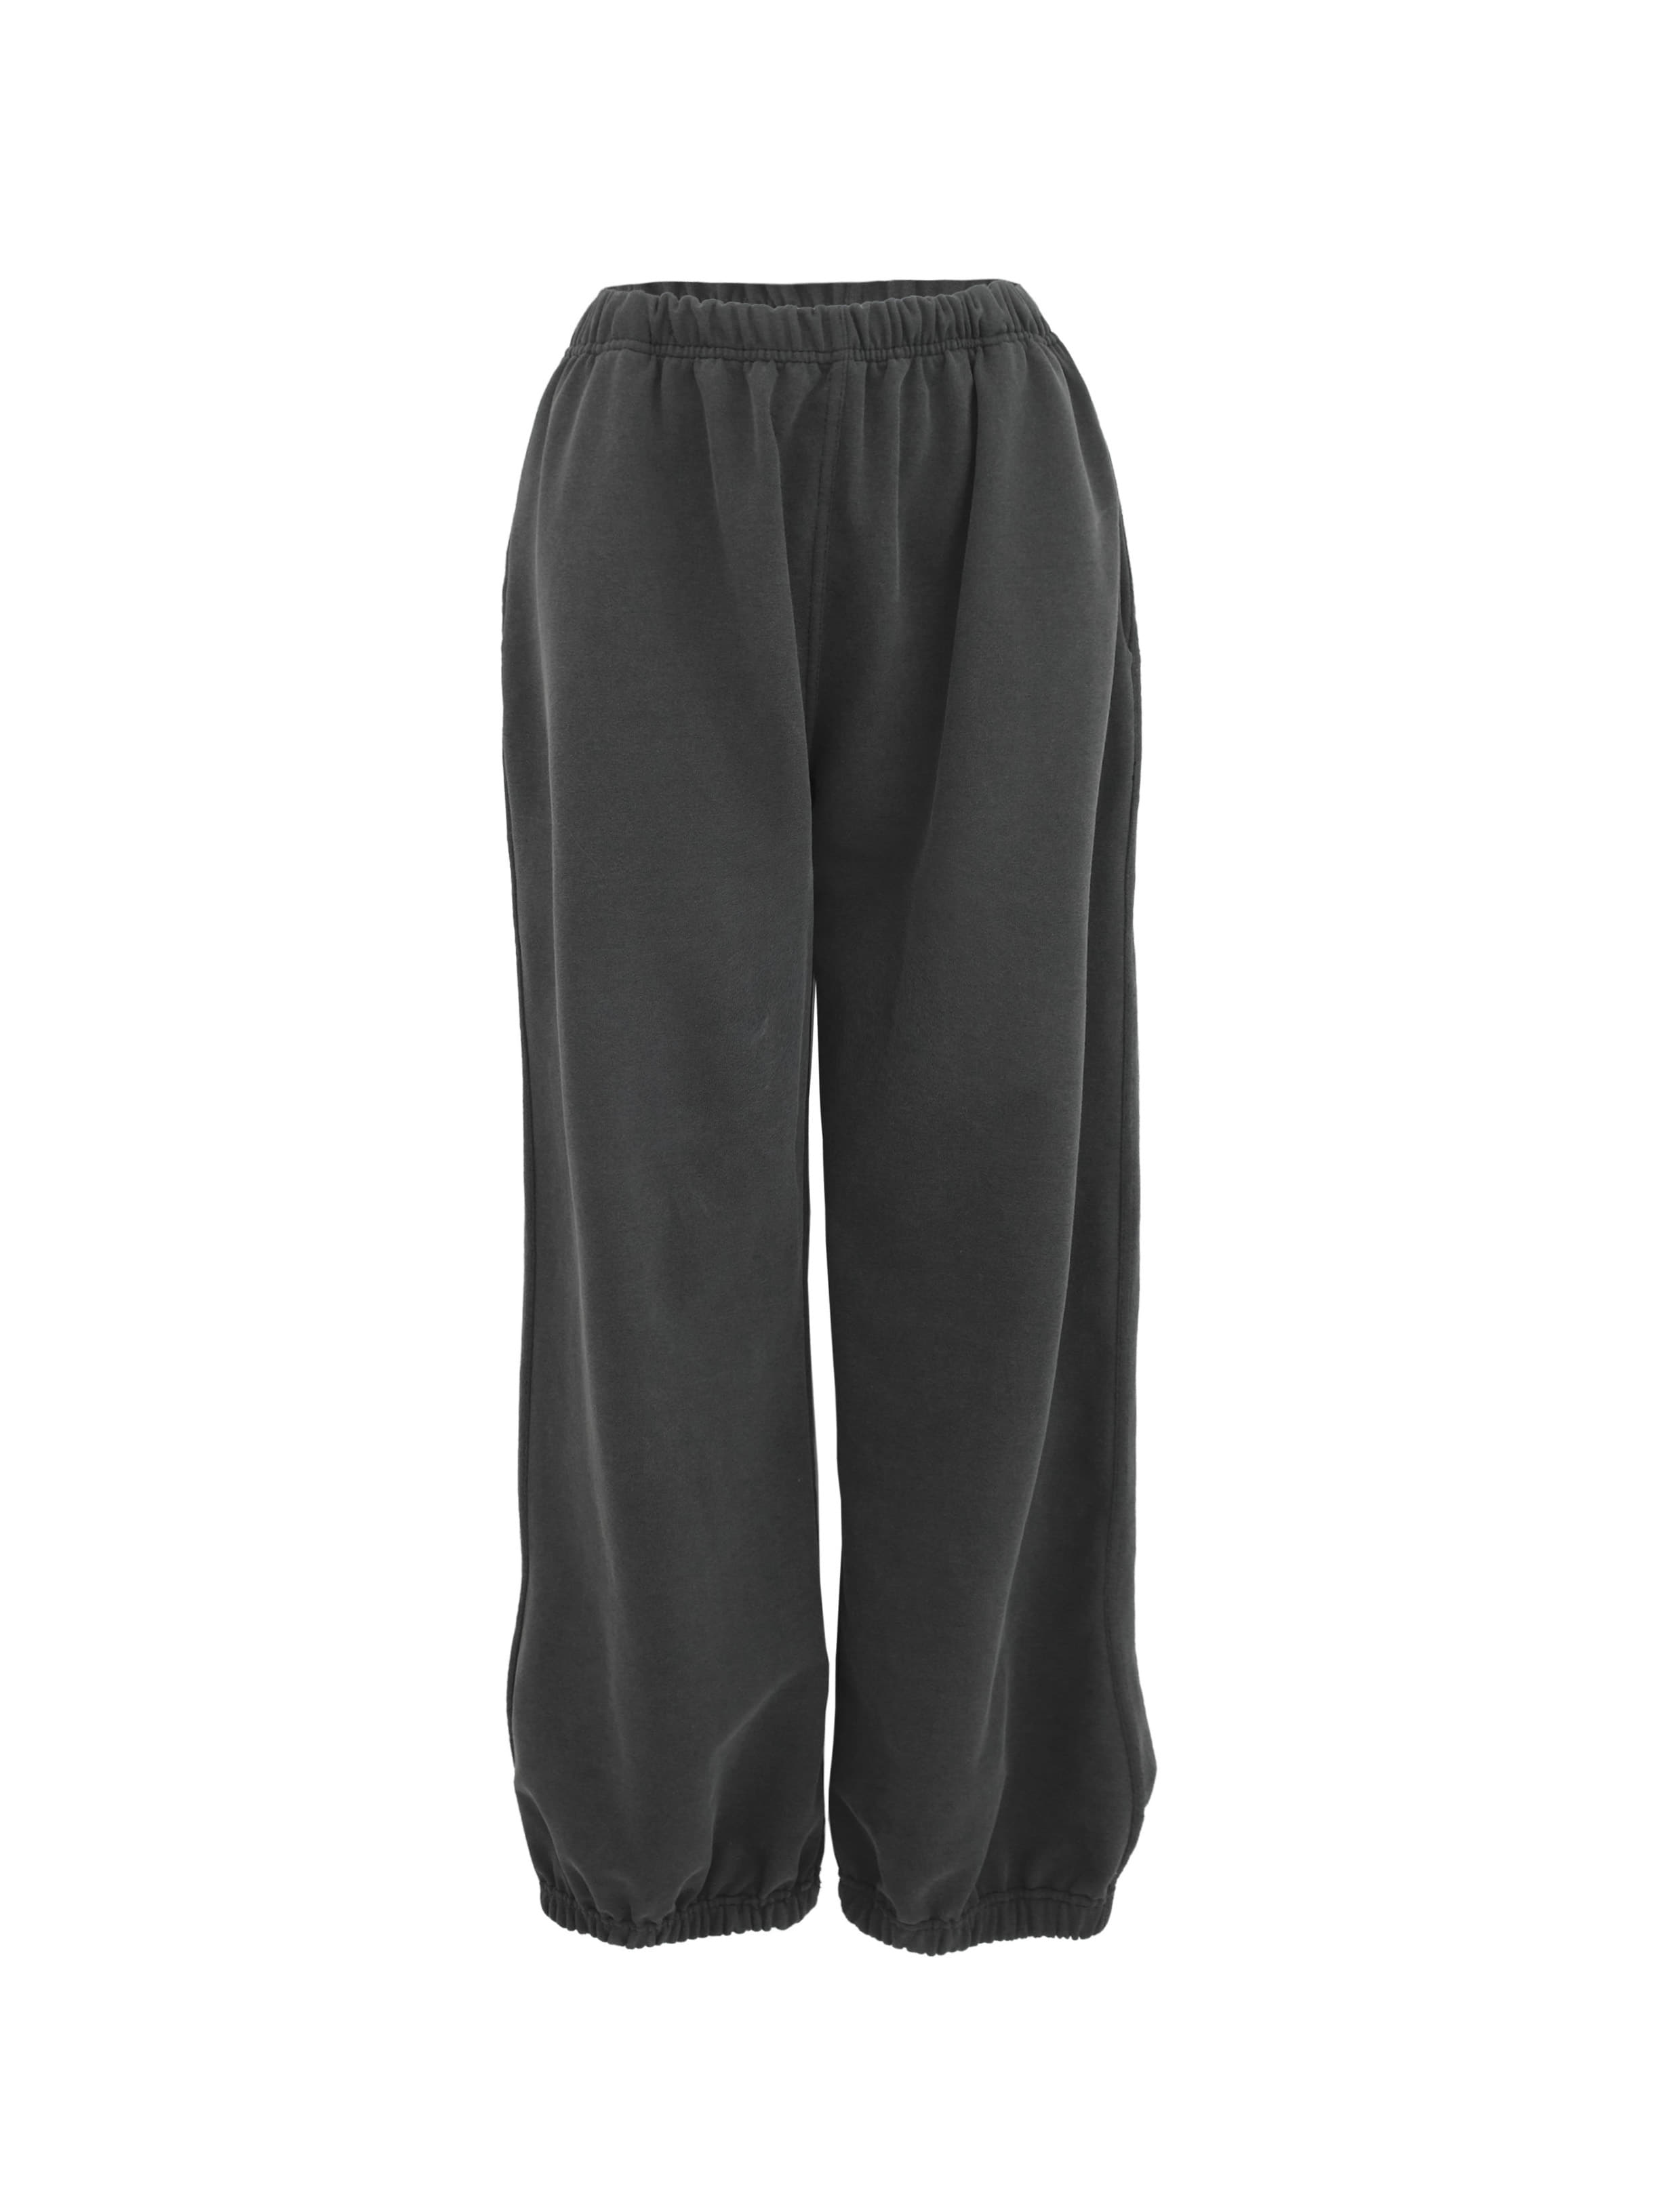 [ODOR MADE] Pigment jogger pants